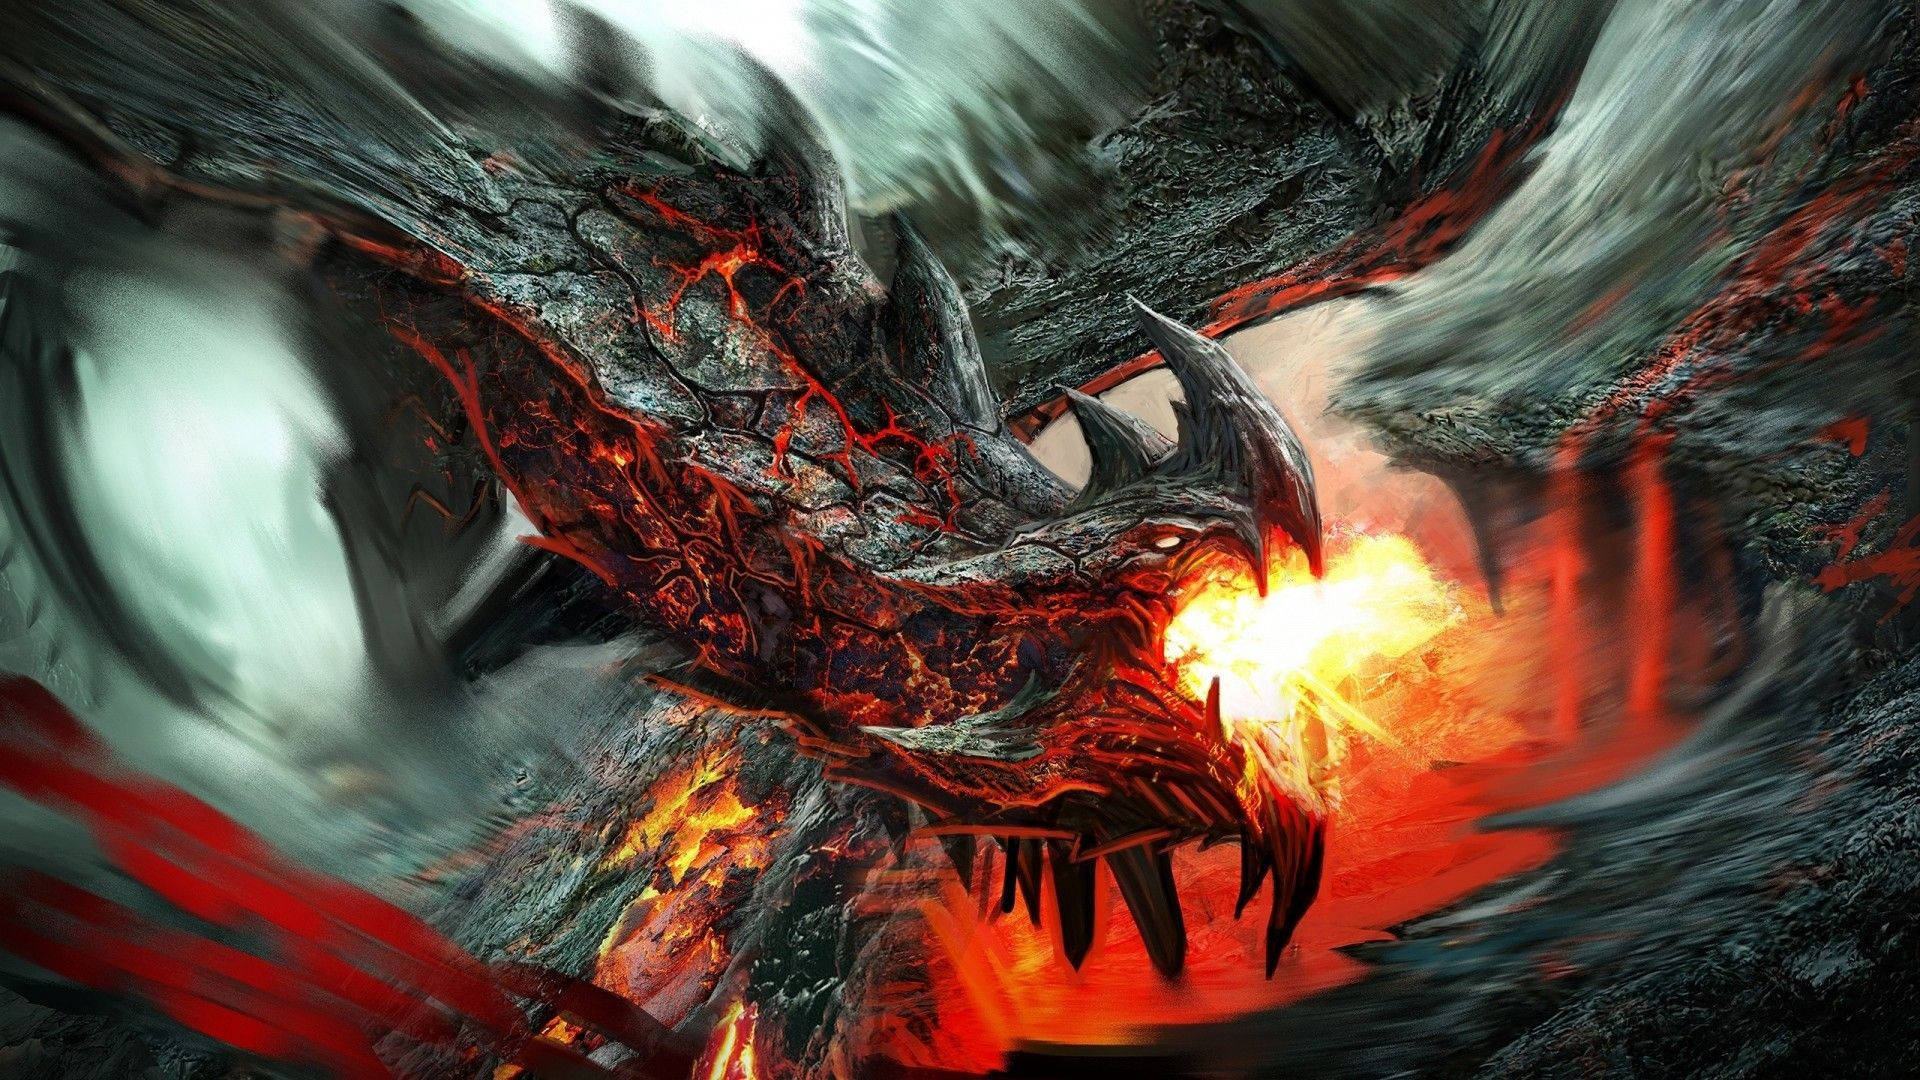 100+] Fire Dragon Wallpapers For Free | Wallpapers.Com